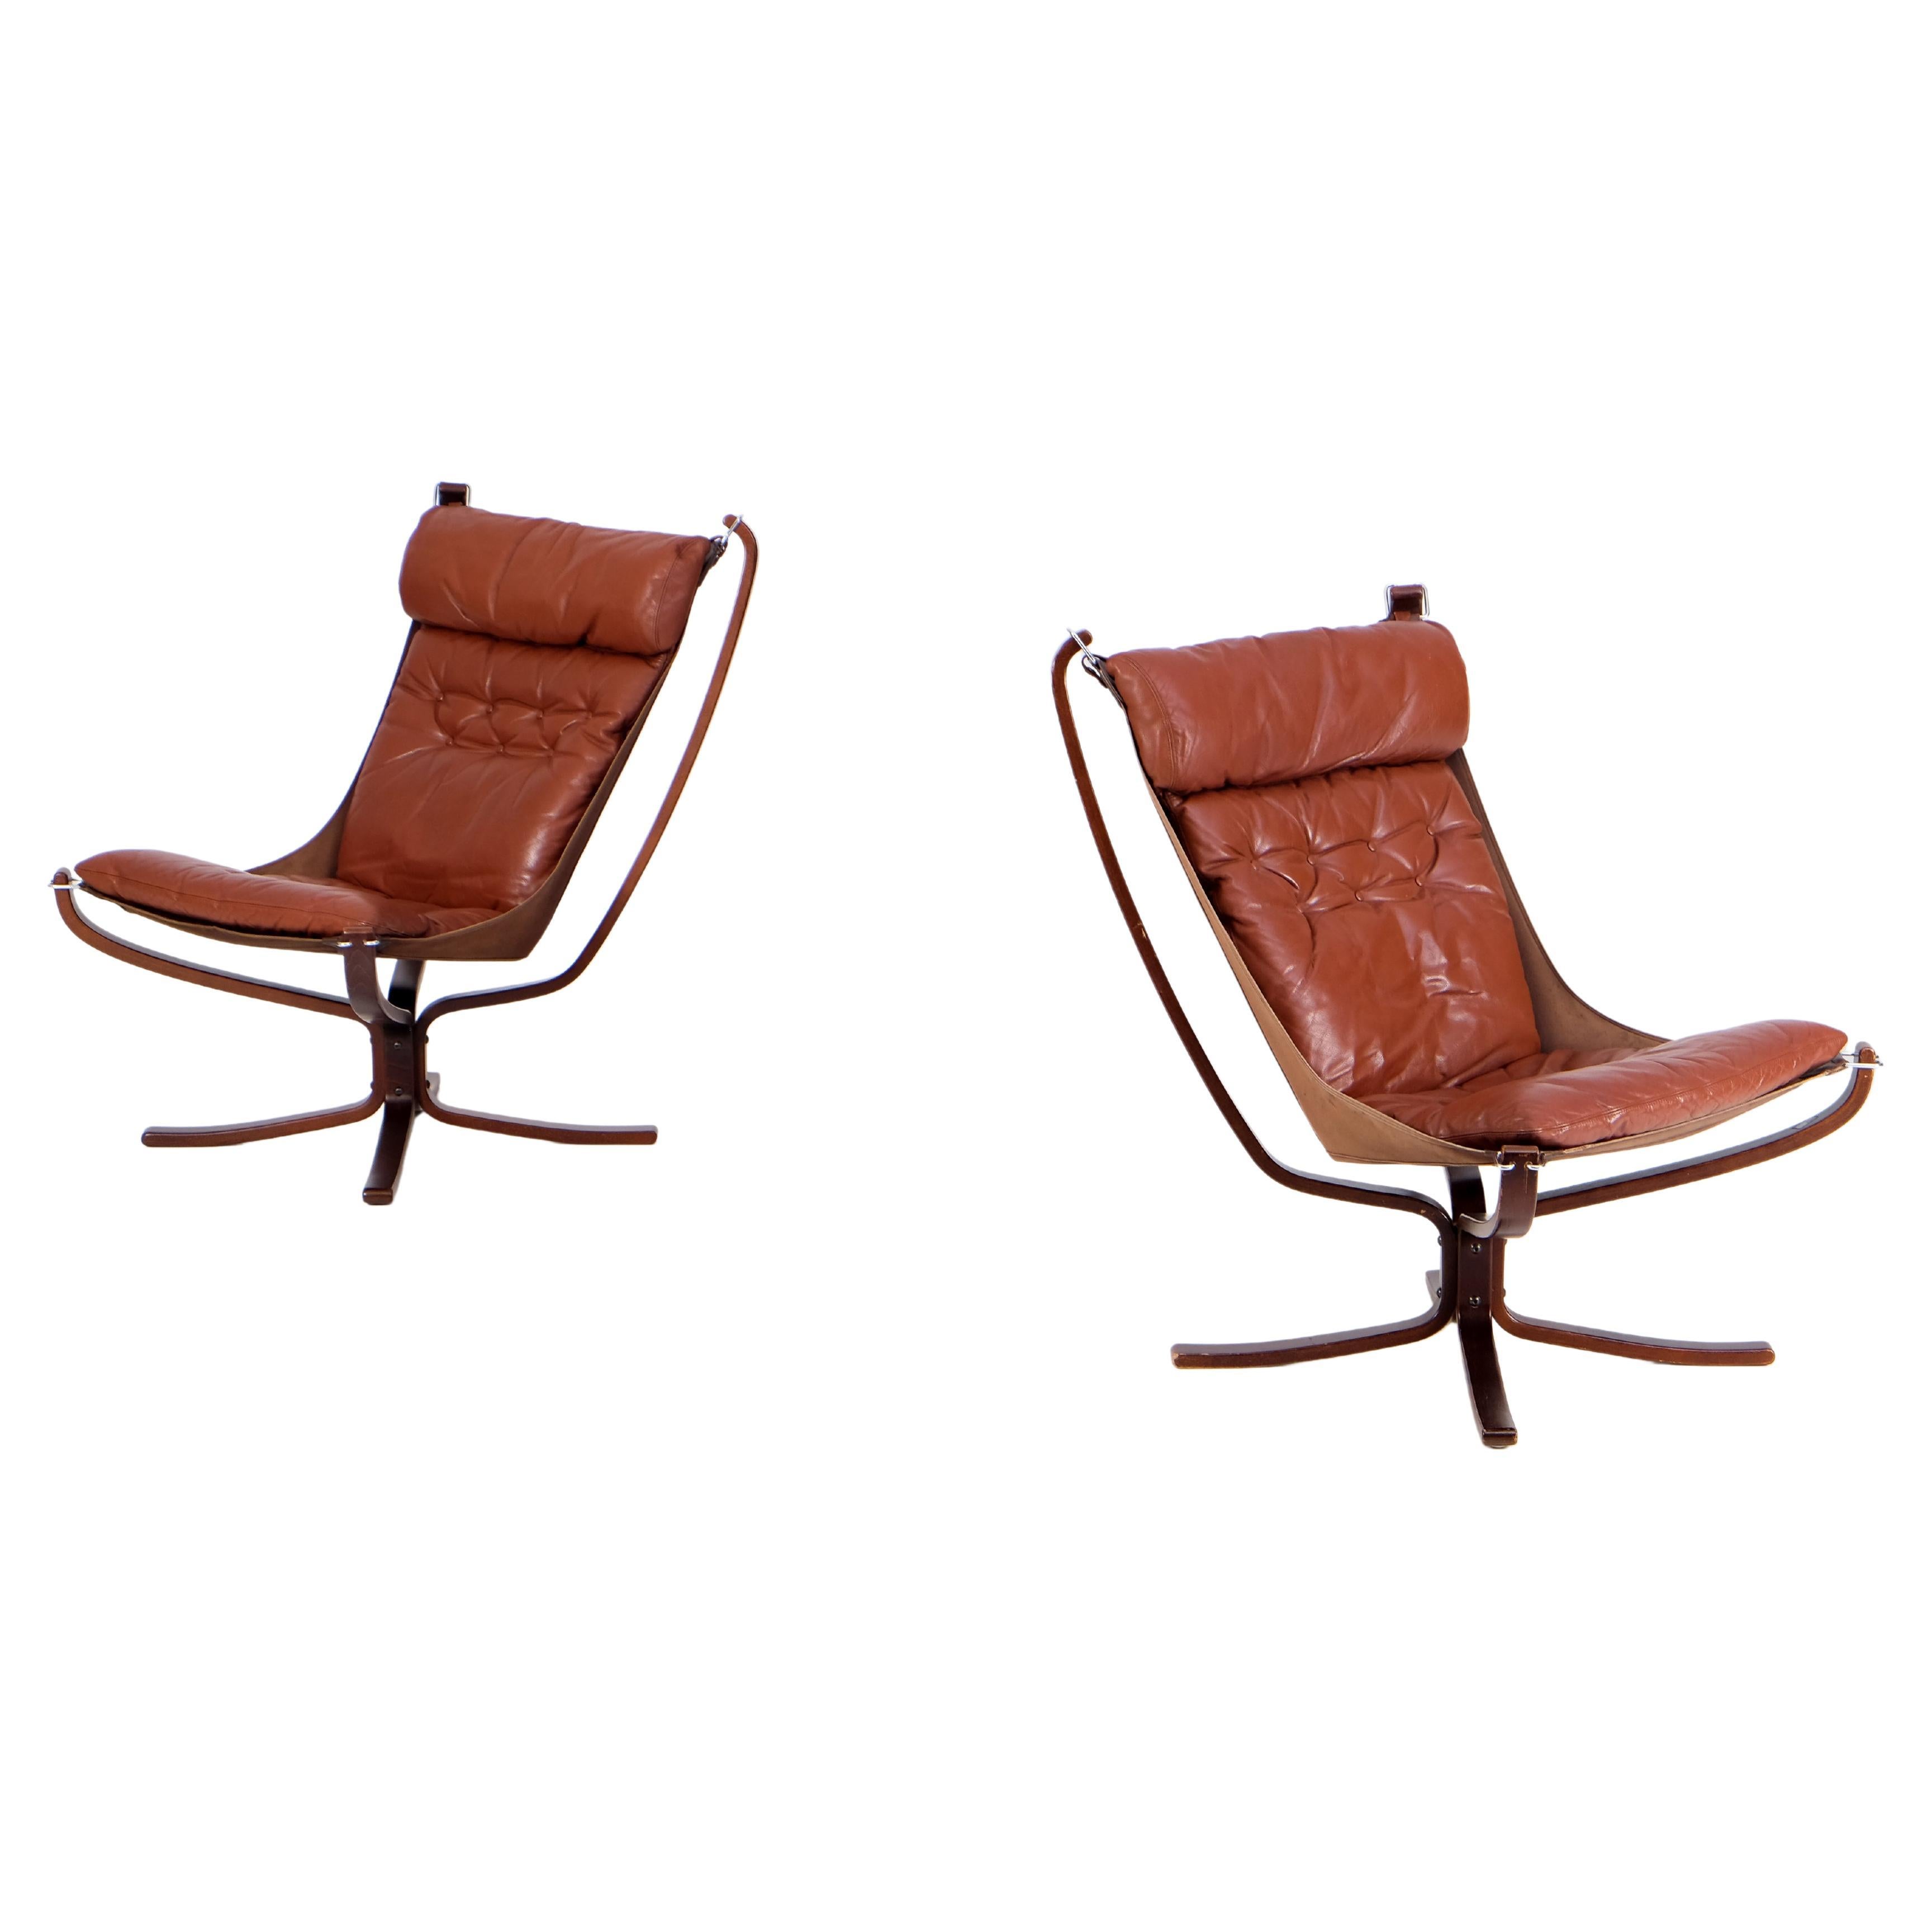 Pair of "Falcon" Easy Chairs by Sigurd Resell, Norway, 1970s